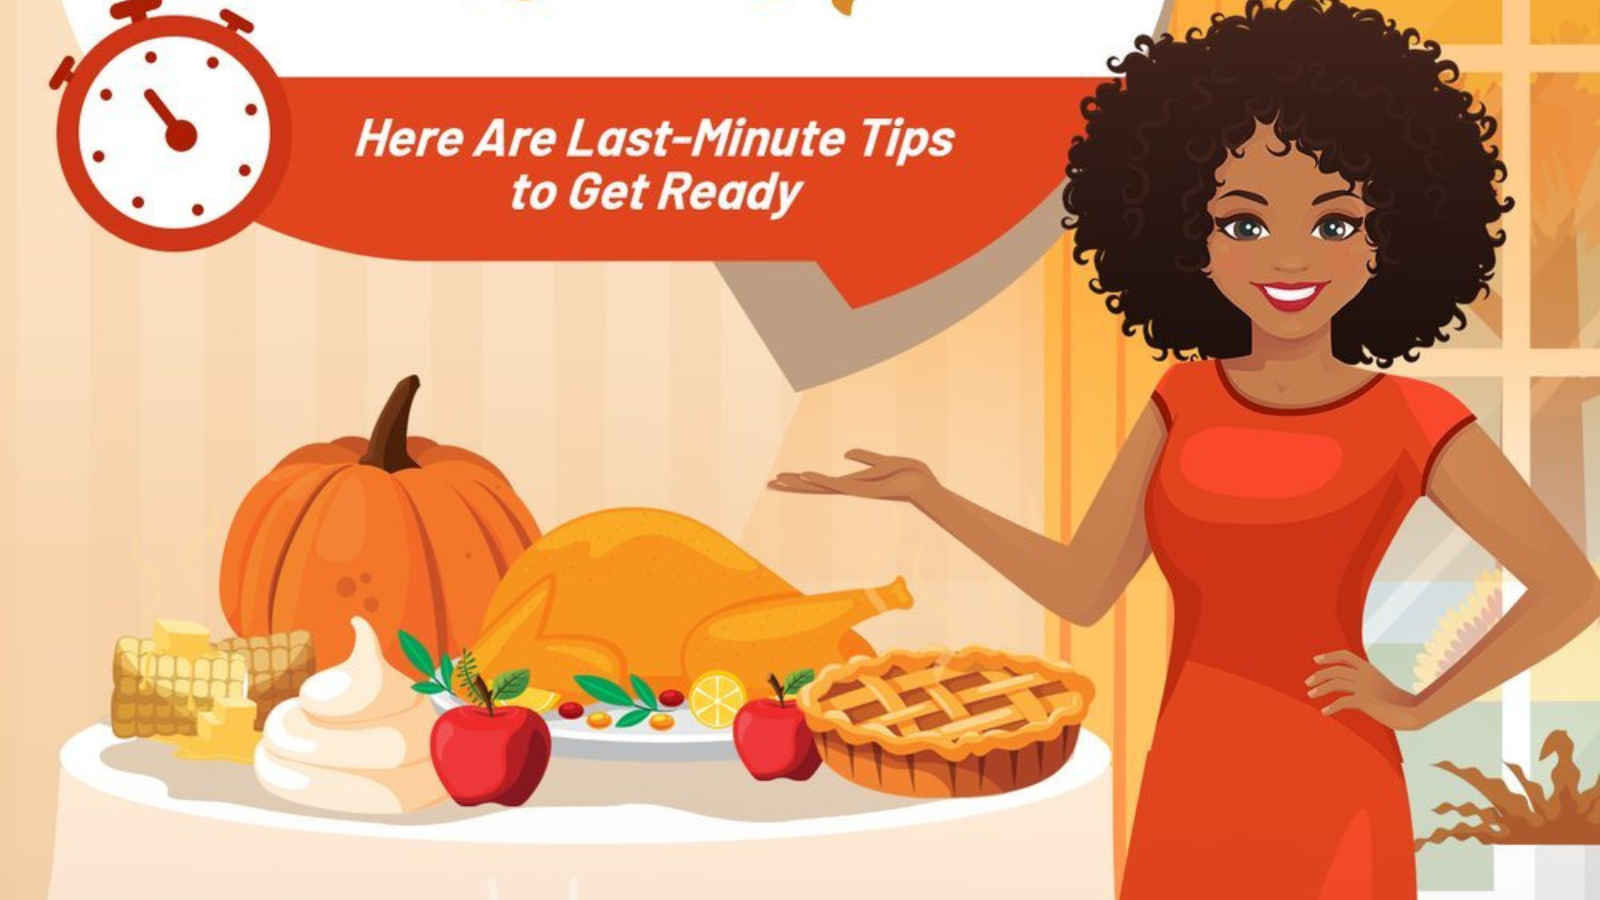 Hosting Thanksgiving in Your New Bay Area Home: Last-Minute Tips to Get Ready